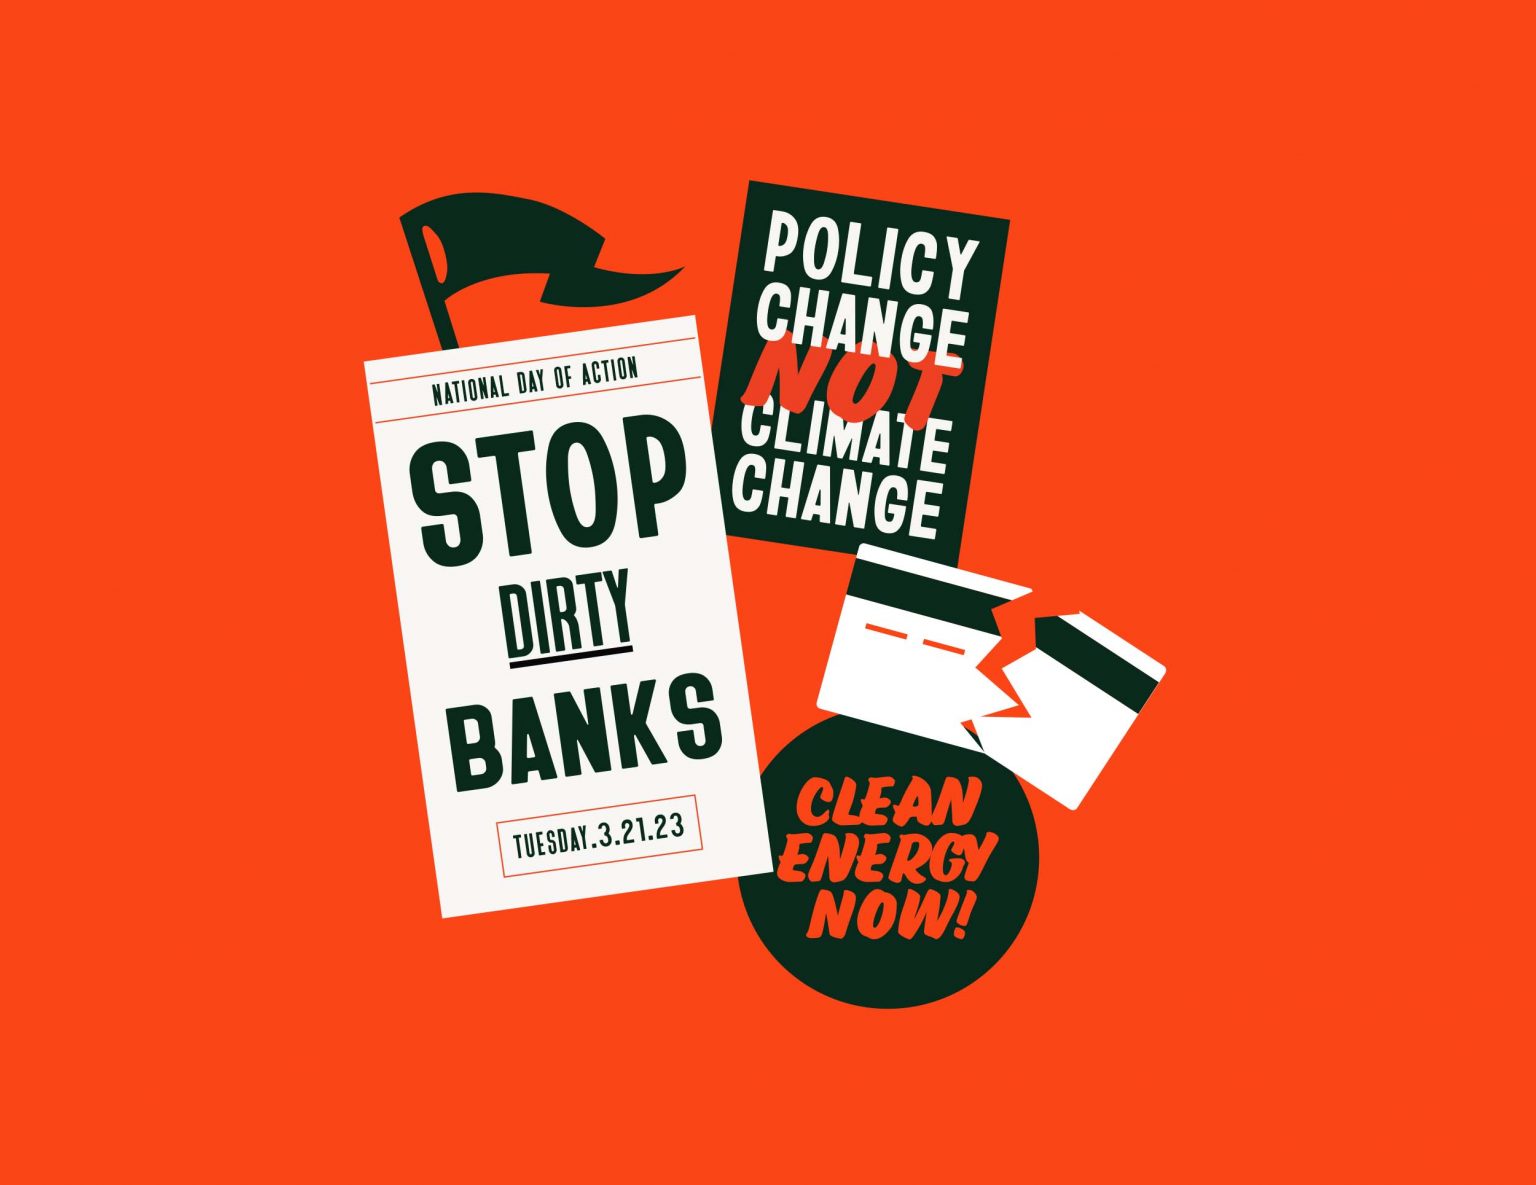 Day Of Action To Protest Big Banks’ Funding Of Fossil Fuel Industry Is Tuesday In West Hartford